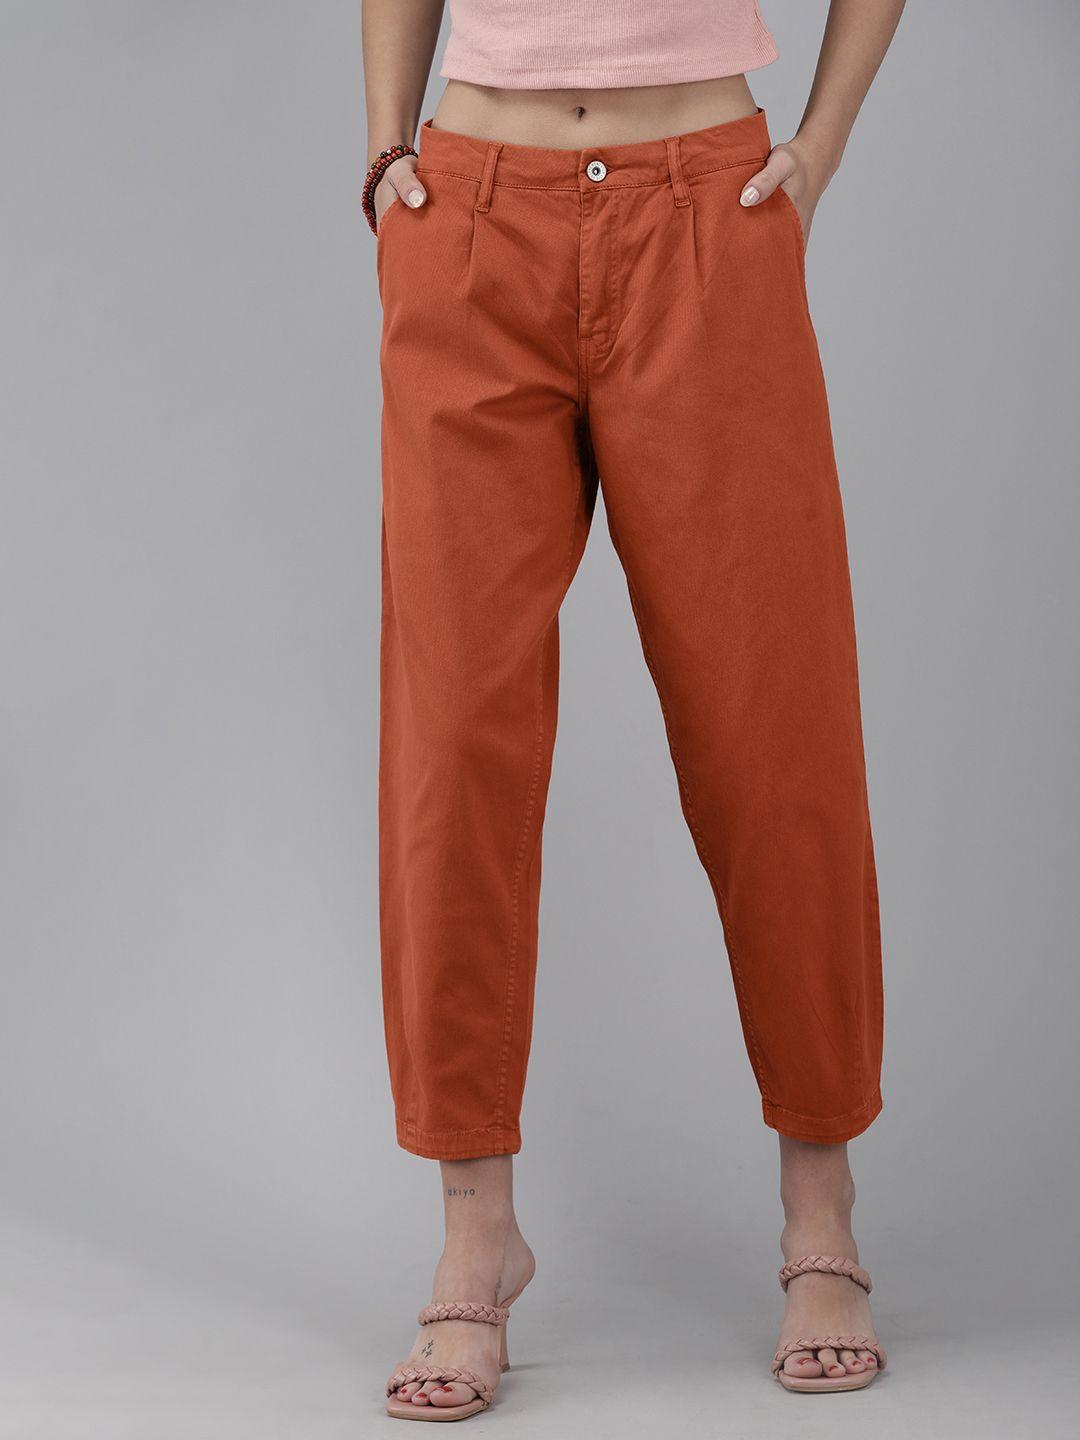 the roadster lifestyle co women rust orange printed slouchy fit cropped regular trousers